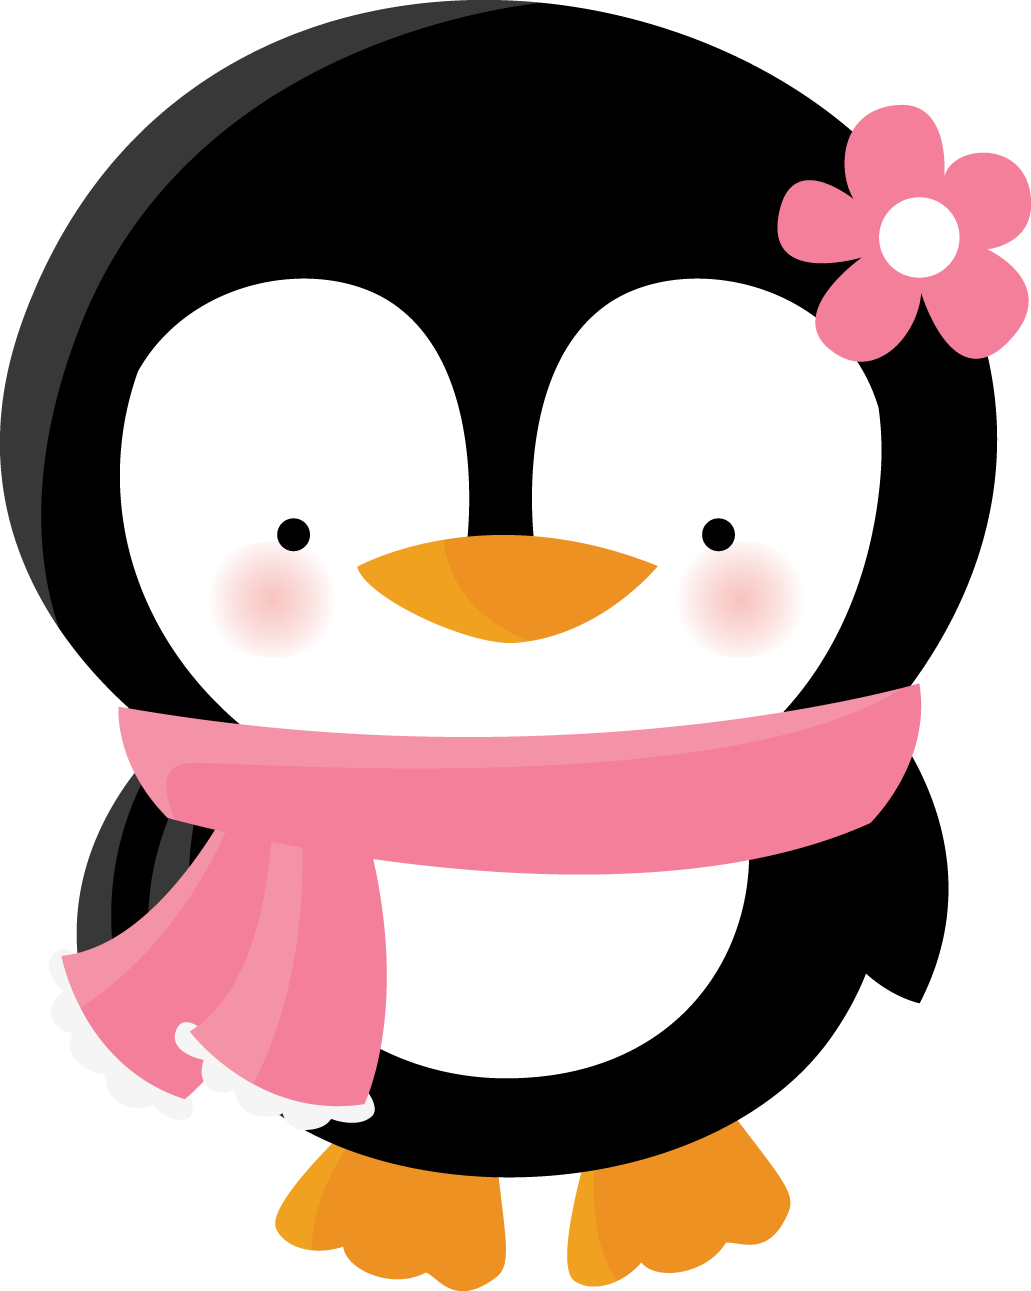 Fairy Penguin svg #9, Download drawings